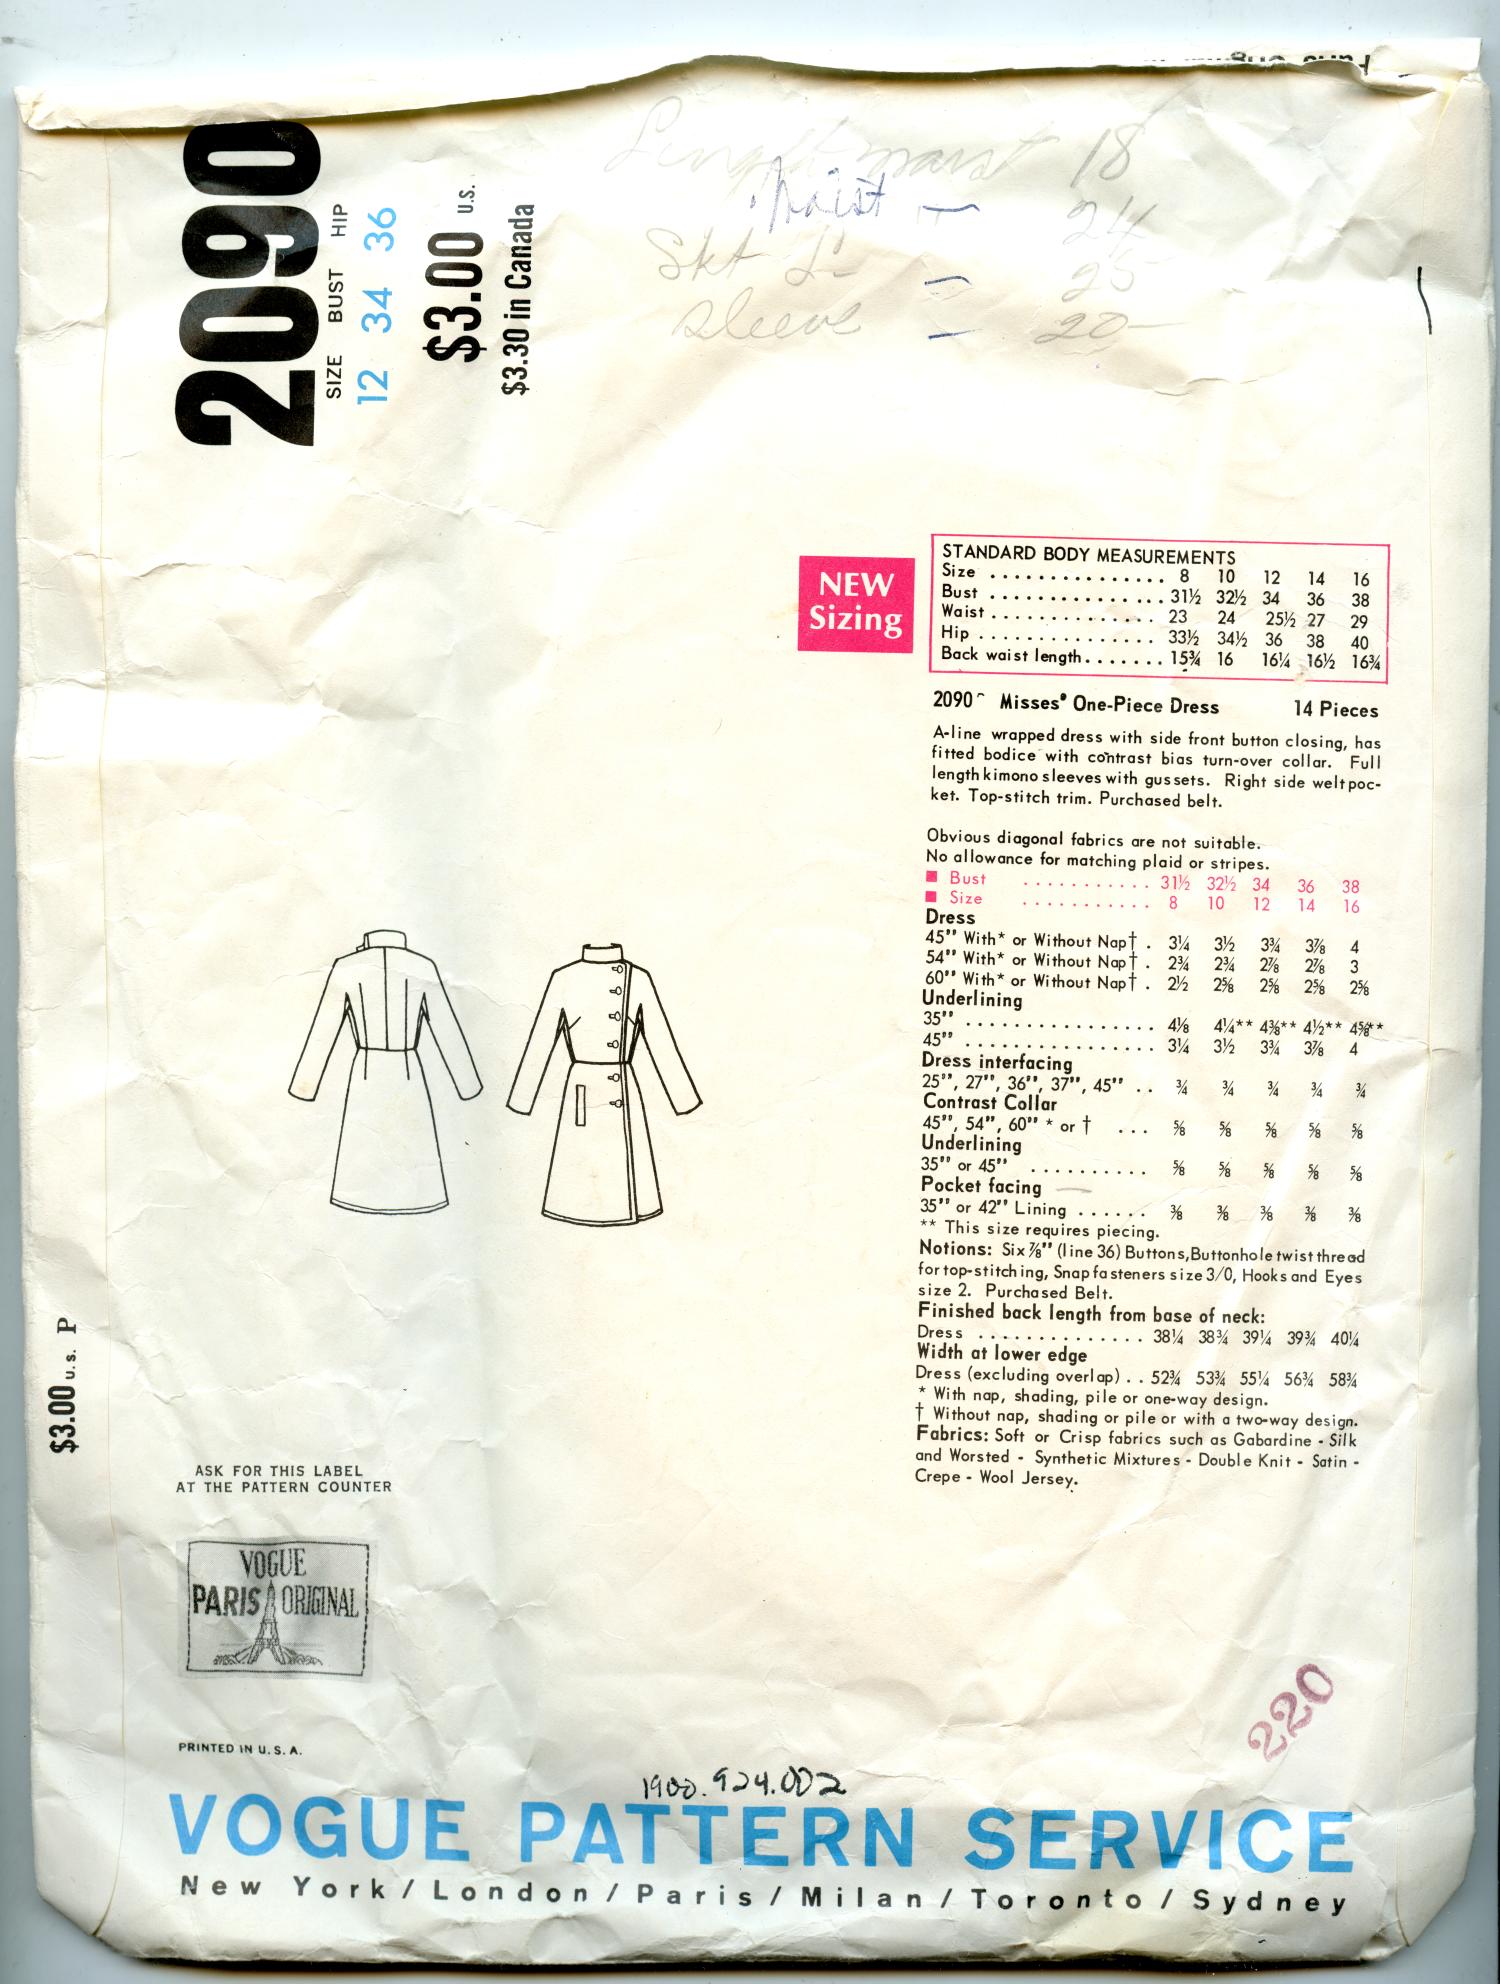 Envelope for Vogue Pattern #2090
                                                
                                                    [Sequence #]: 2 of 2
                                                